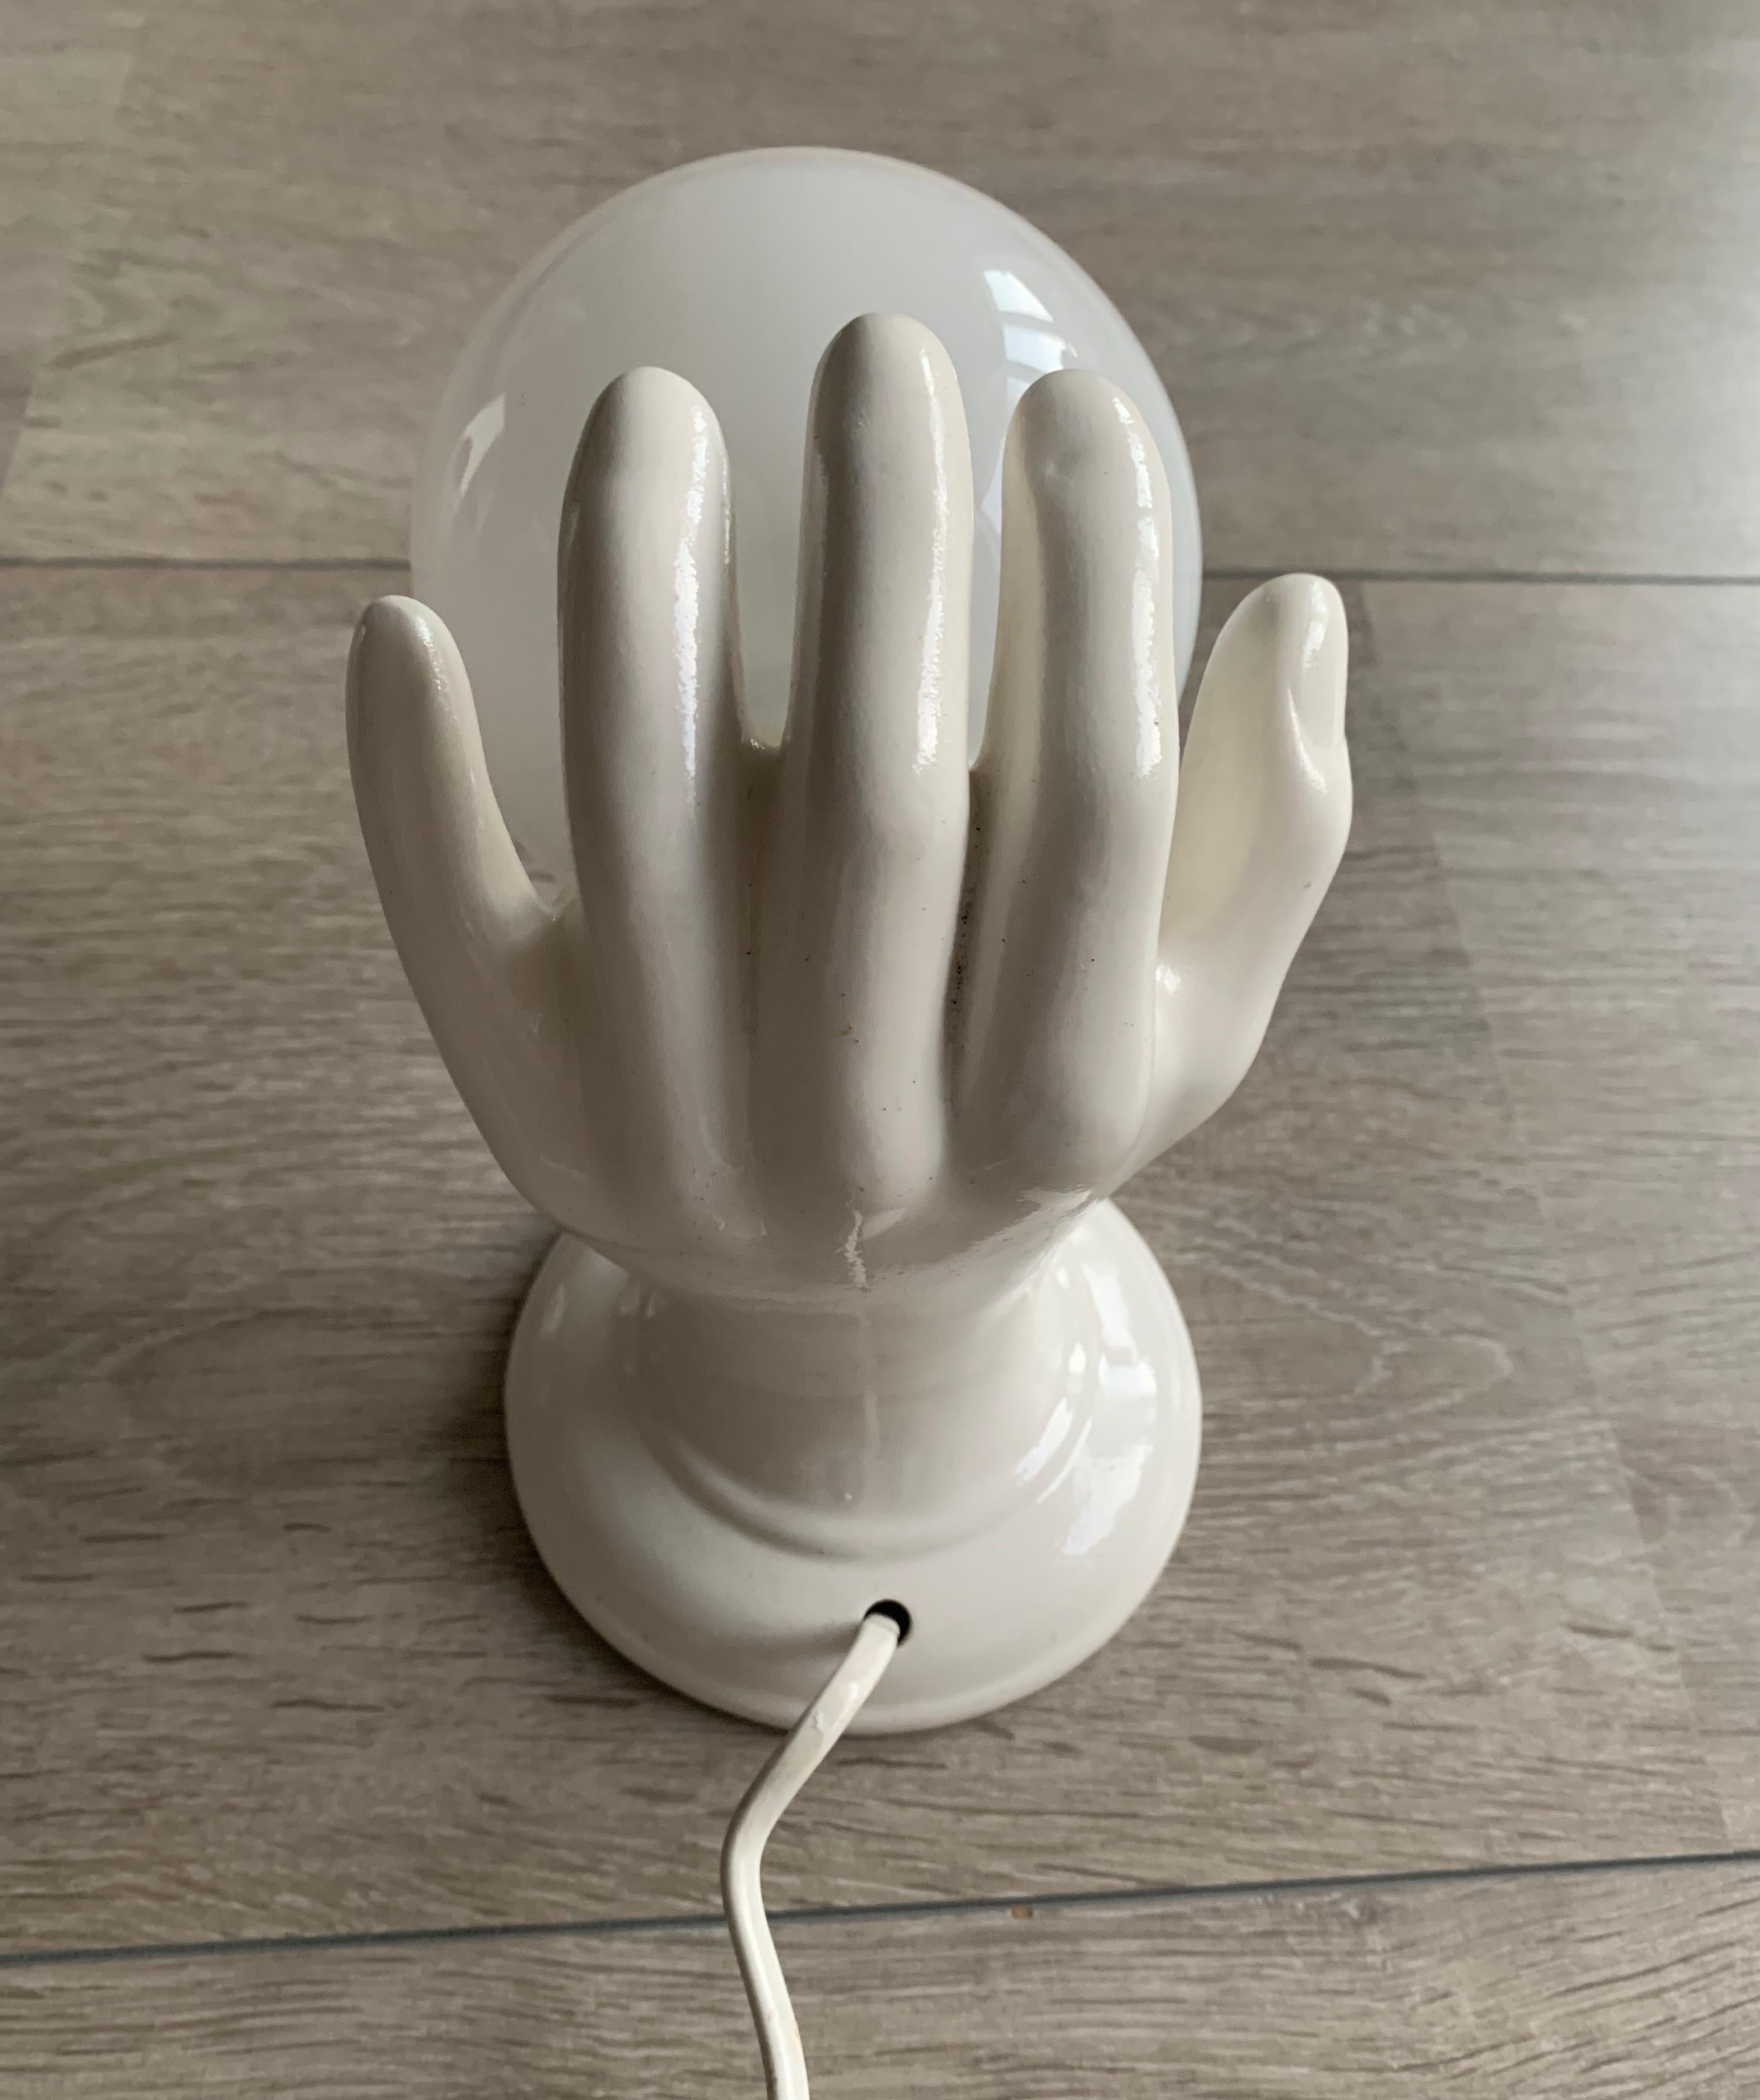 Modern 1970s Glazed White Ceramic Hand Holding a Glass Globe Wall Sconce or Wall Light